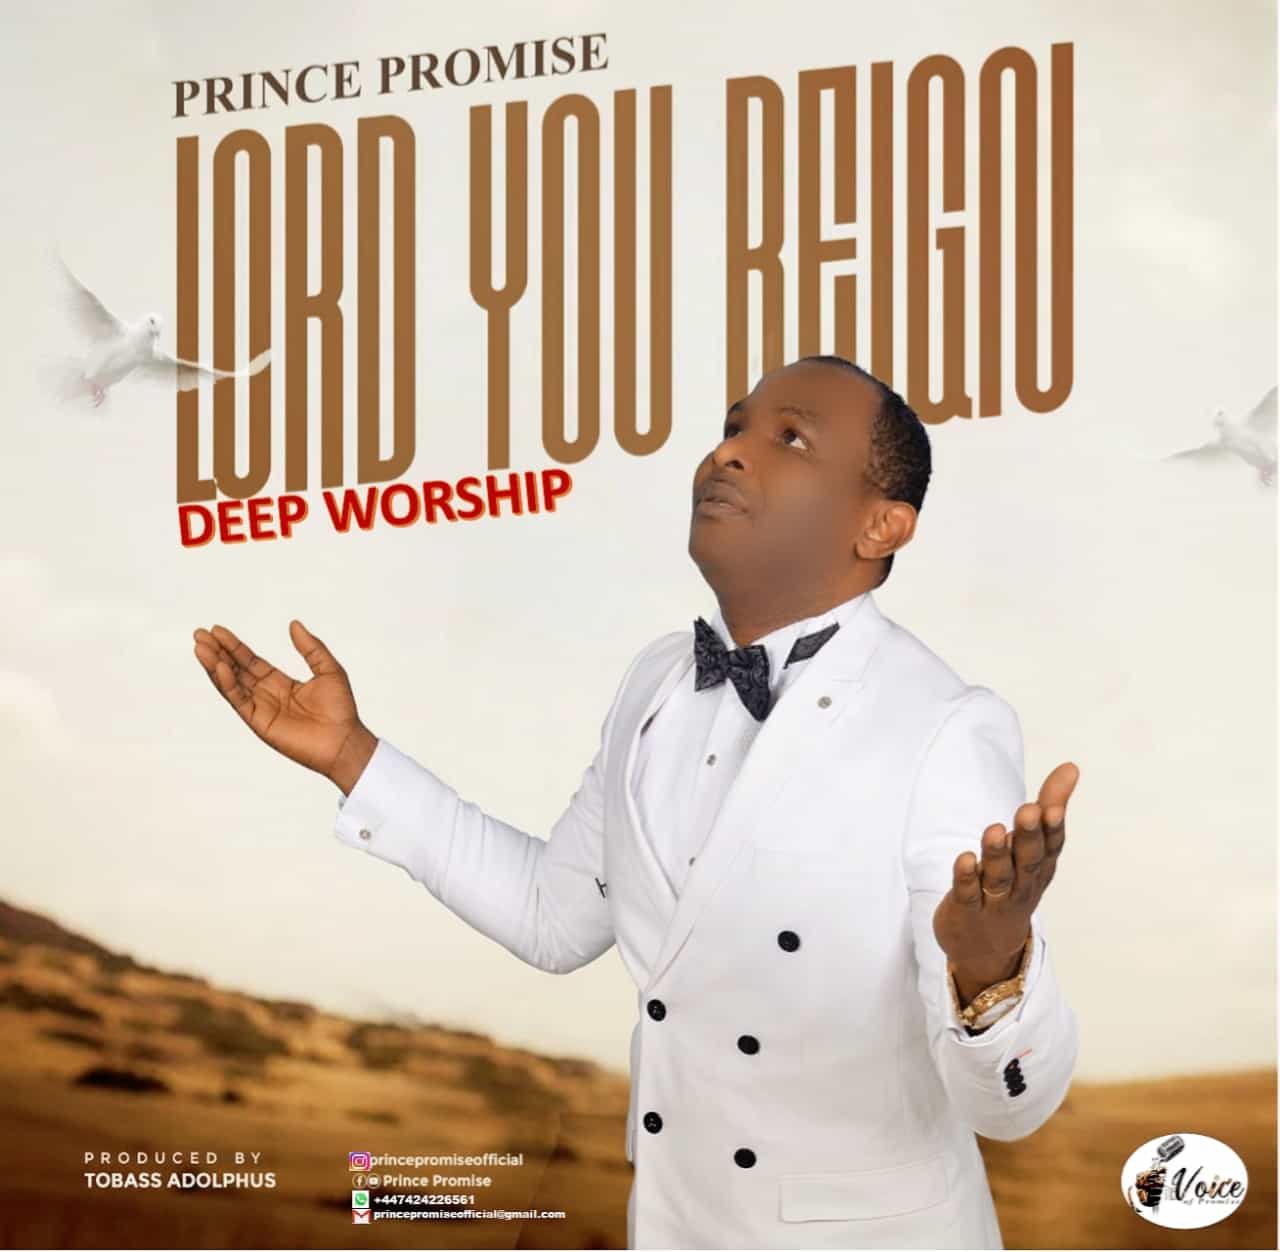 Prince Promise - Lord You Reign